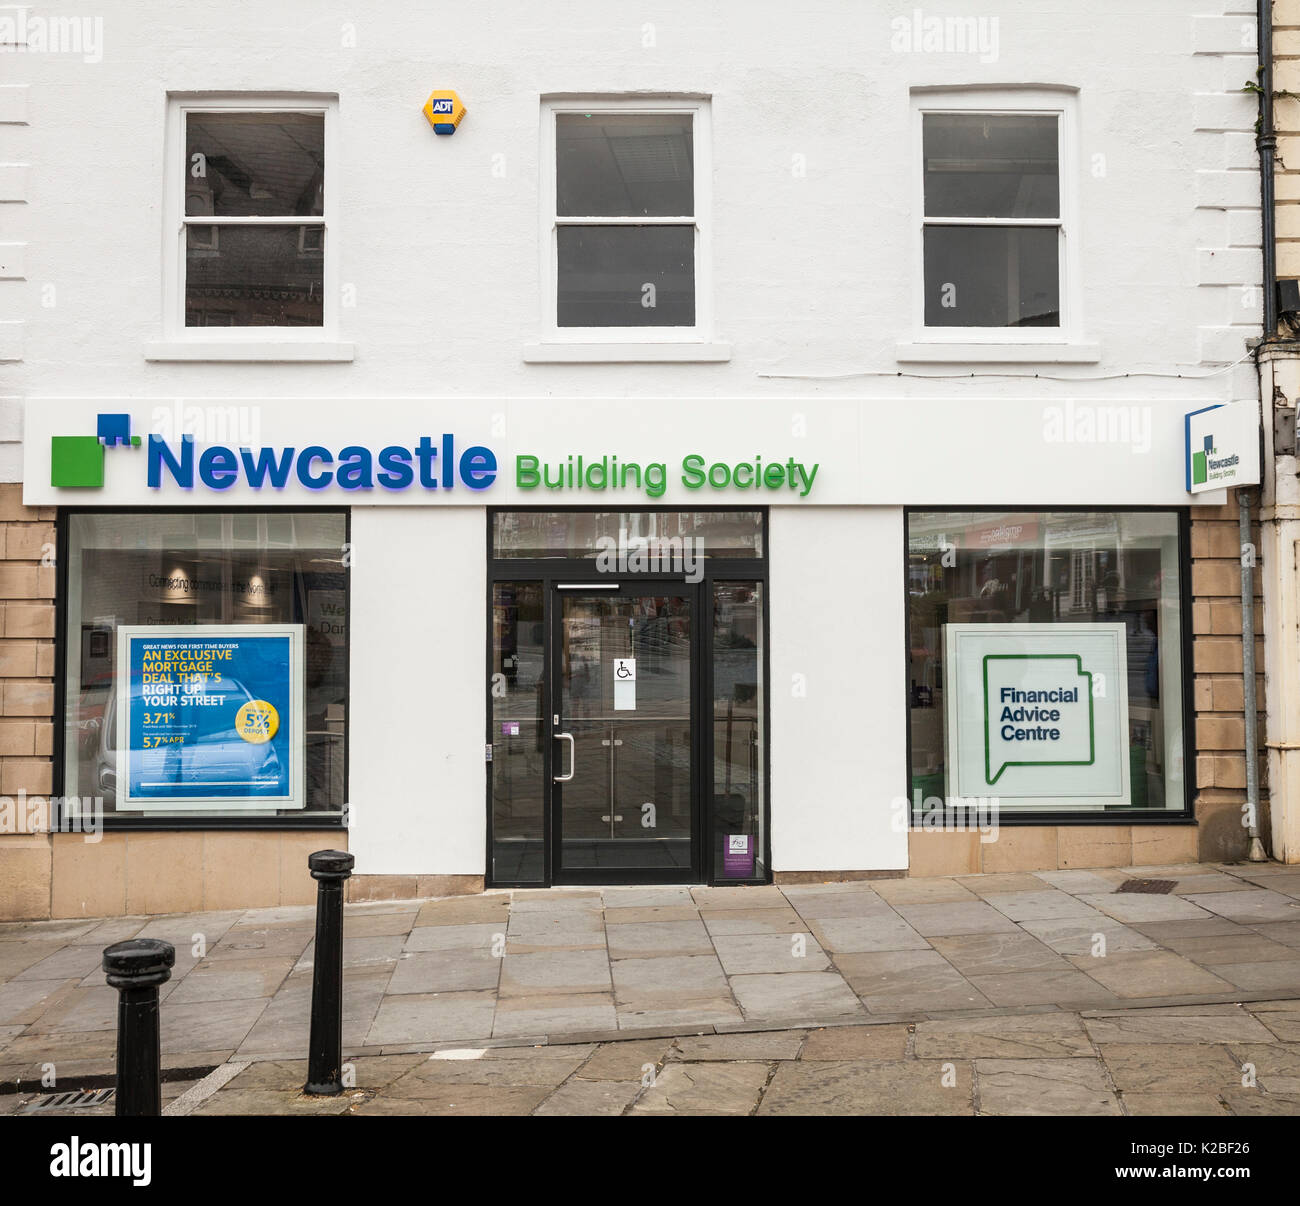 Newcastle Building Society à Darlington,Angleterre,UK Banque D'Images